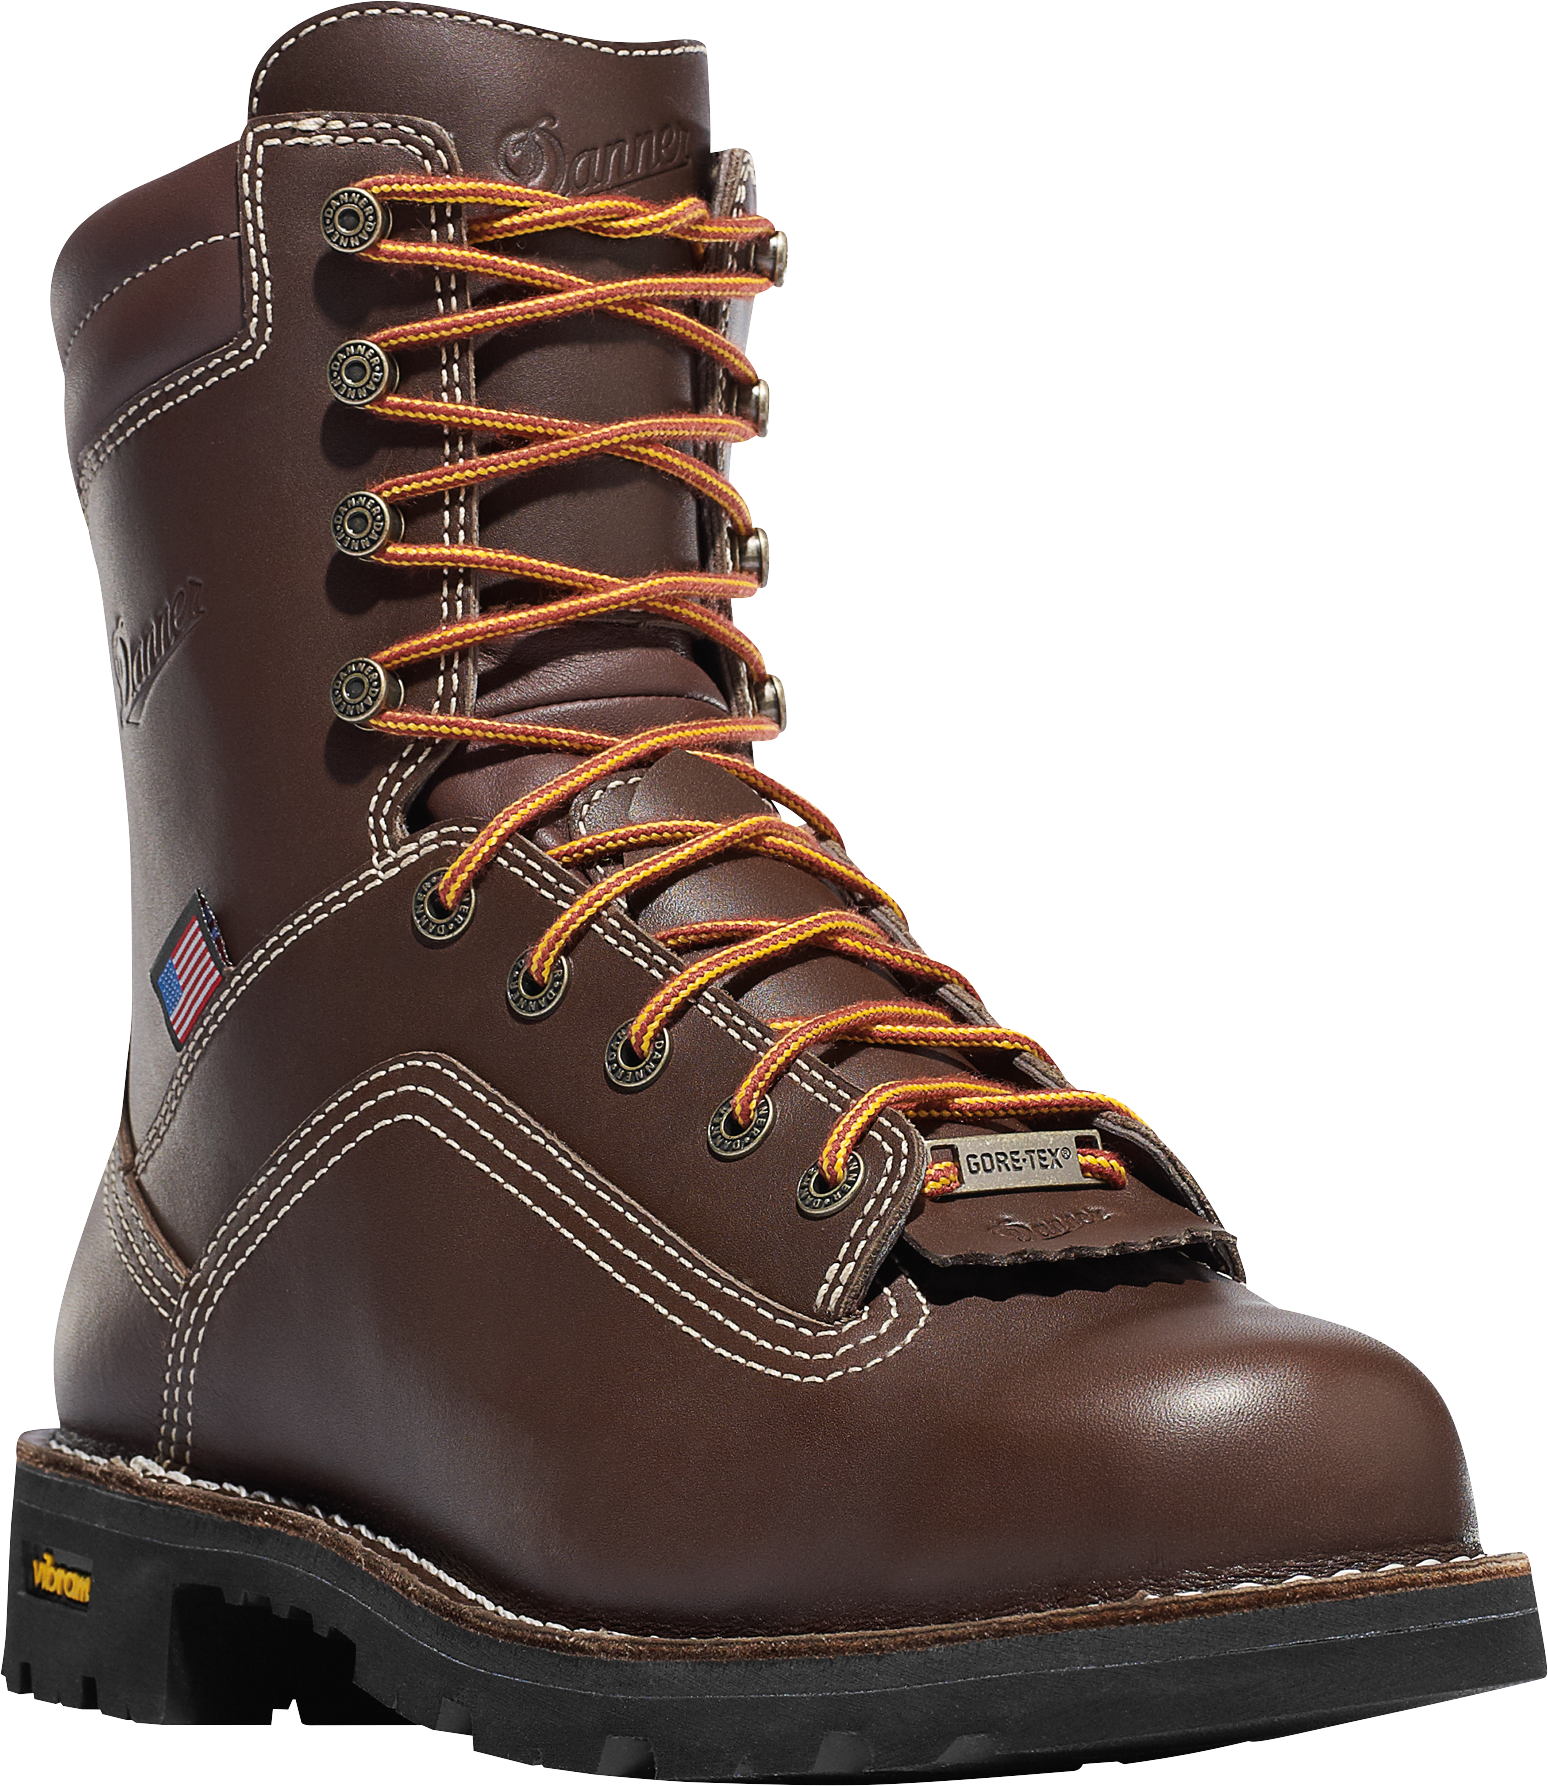 Danner Quarry USA GORE-TEX Alloy Toe Work Boots for Men